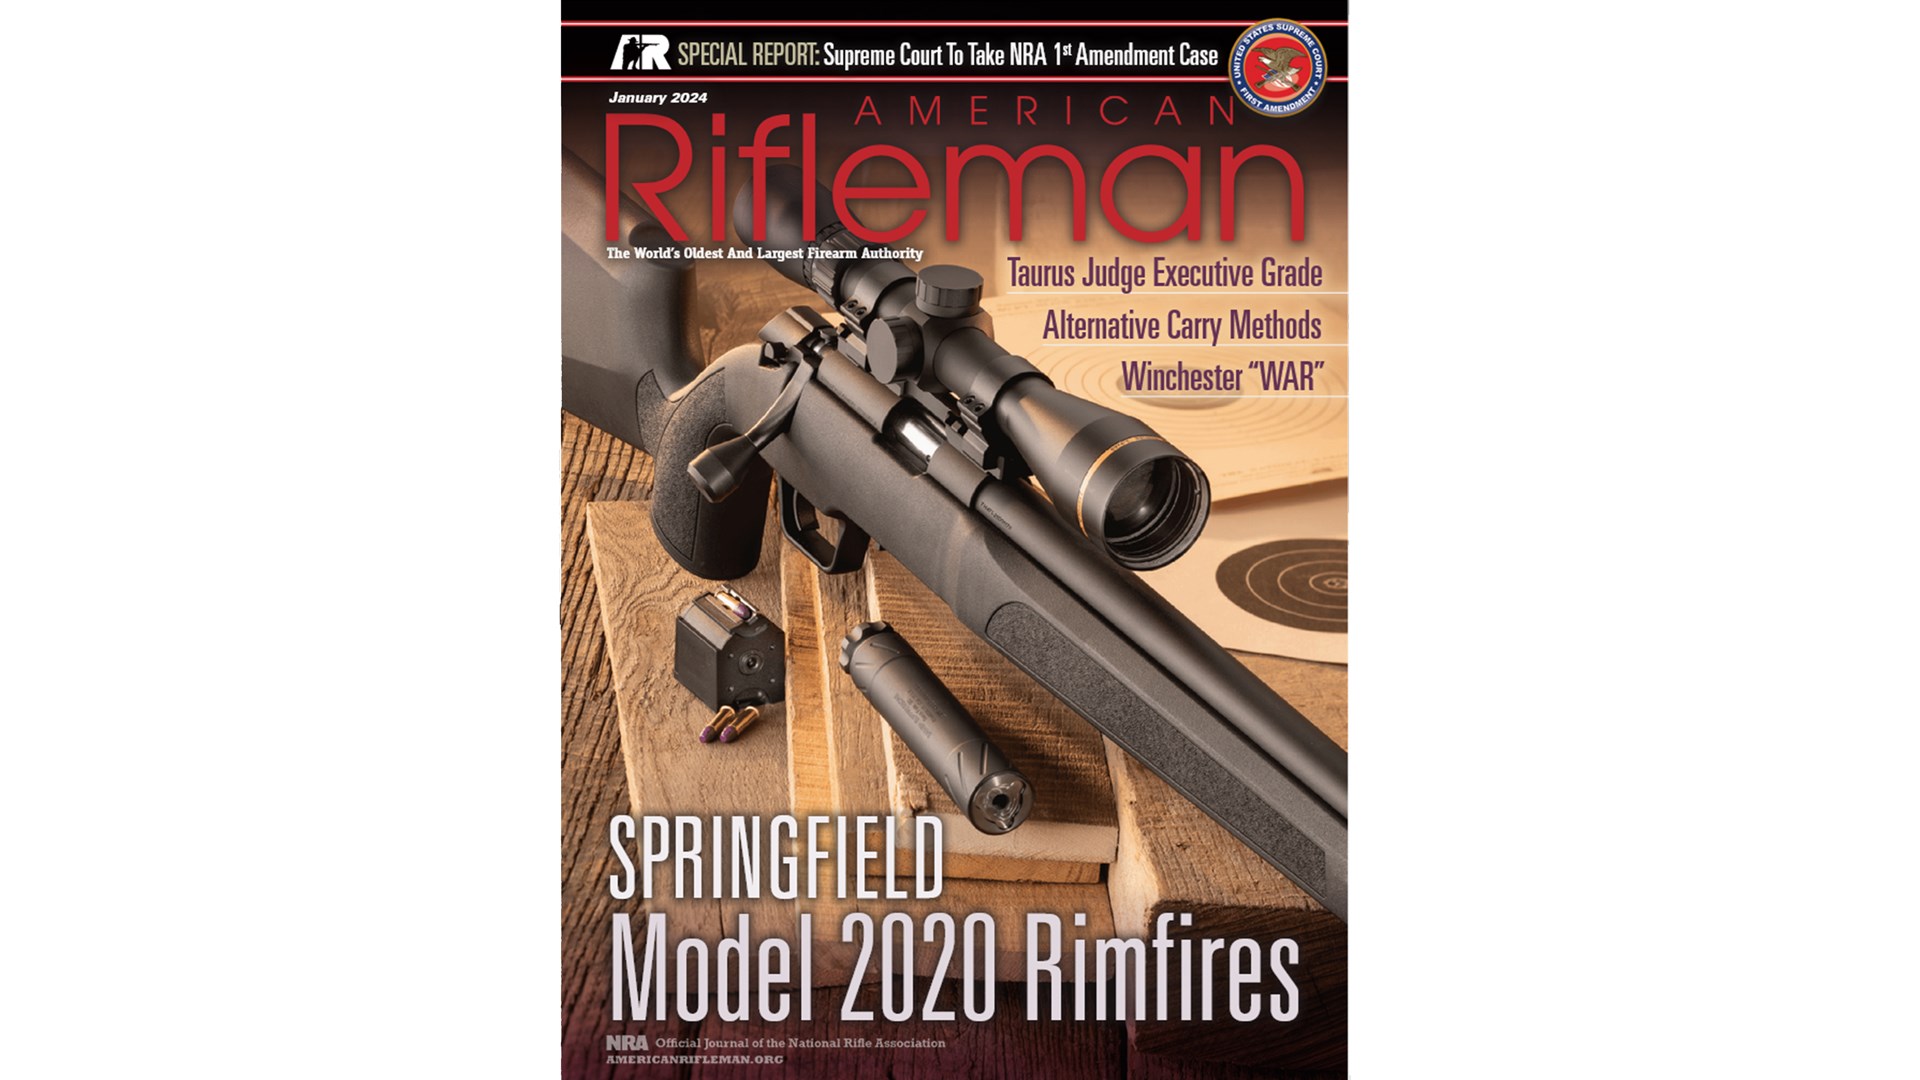 American Rifleman magazine cover January 2024 featuring Springfield Armory Model 2020 Rimfire Target with Silencer Central suppressor ammunition and targets on wood blocks